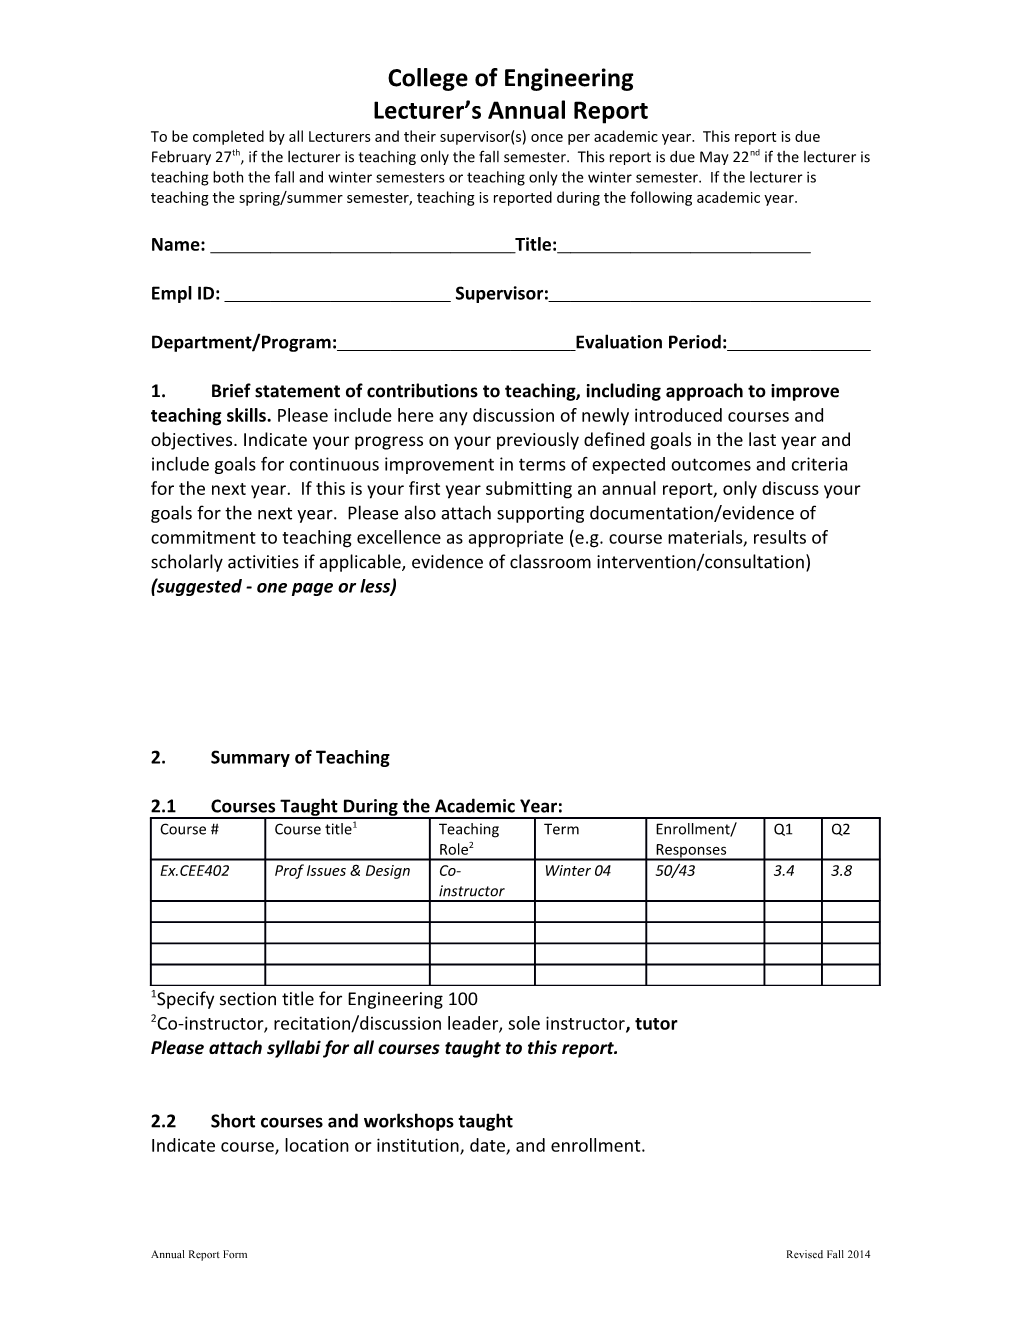 College of Engineeringlecturer S Annual Reviewpage 1